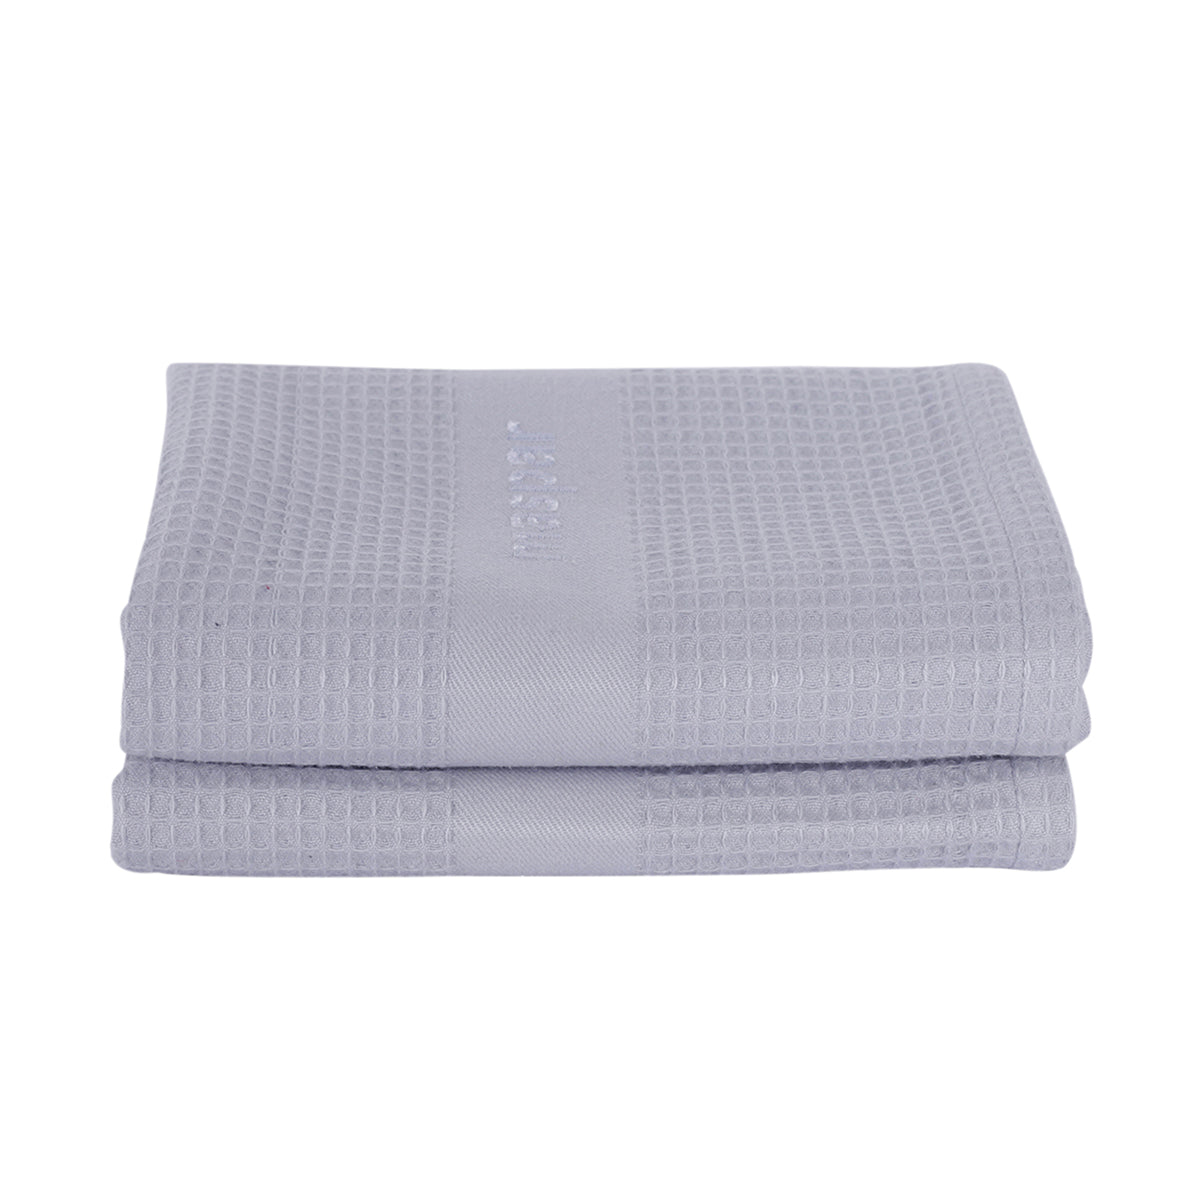 Catalina Waffle Antimicrobial Antifungal Super Absorbent Quick Dry Gym/Travel Vapour Blue Towel Set